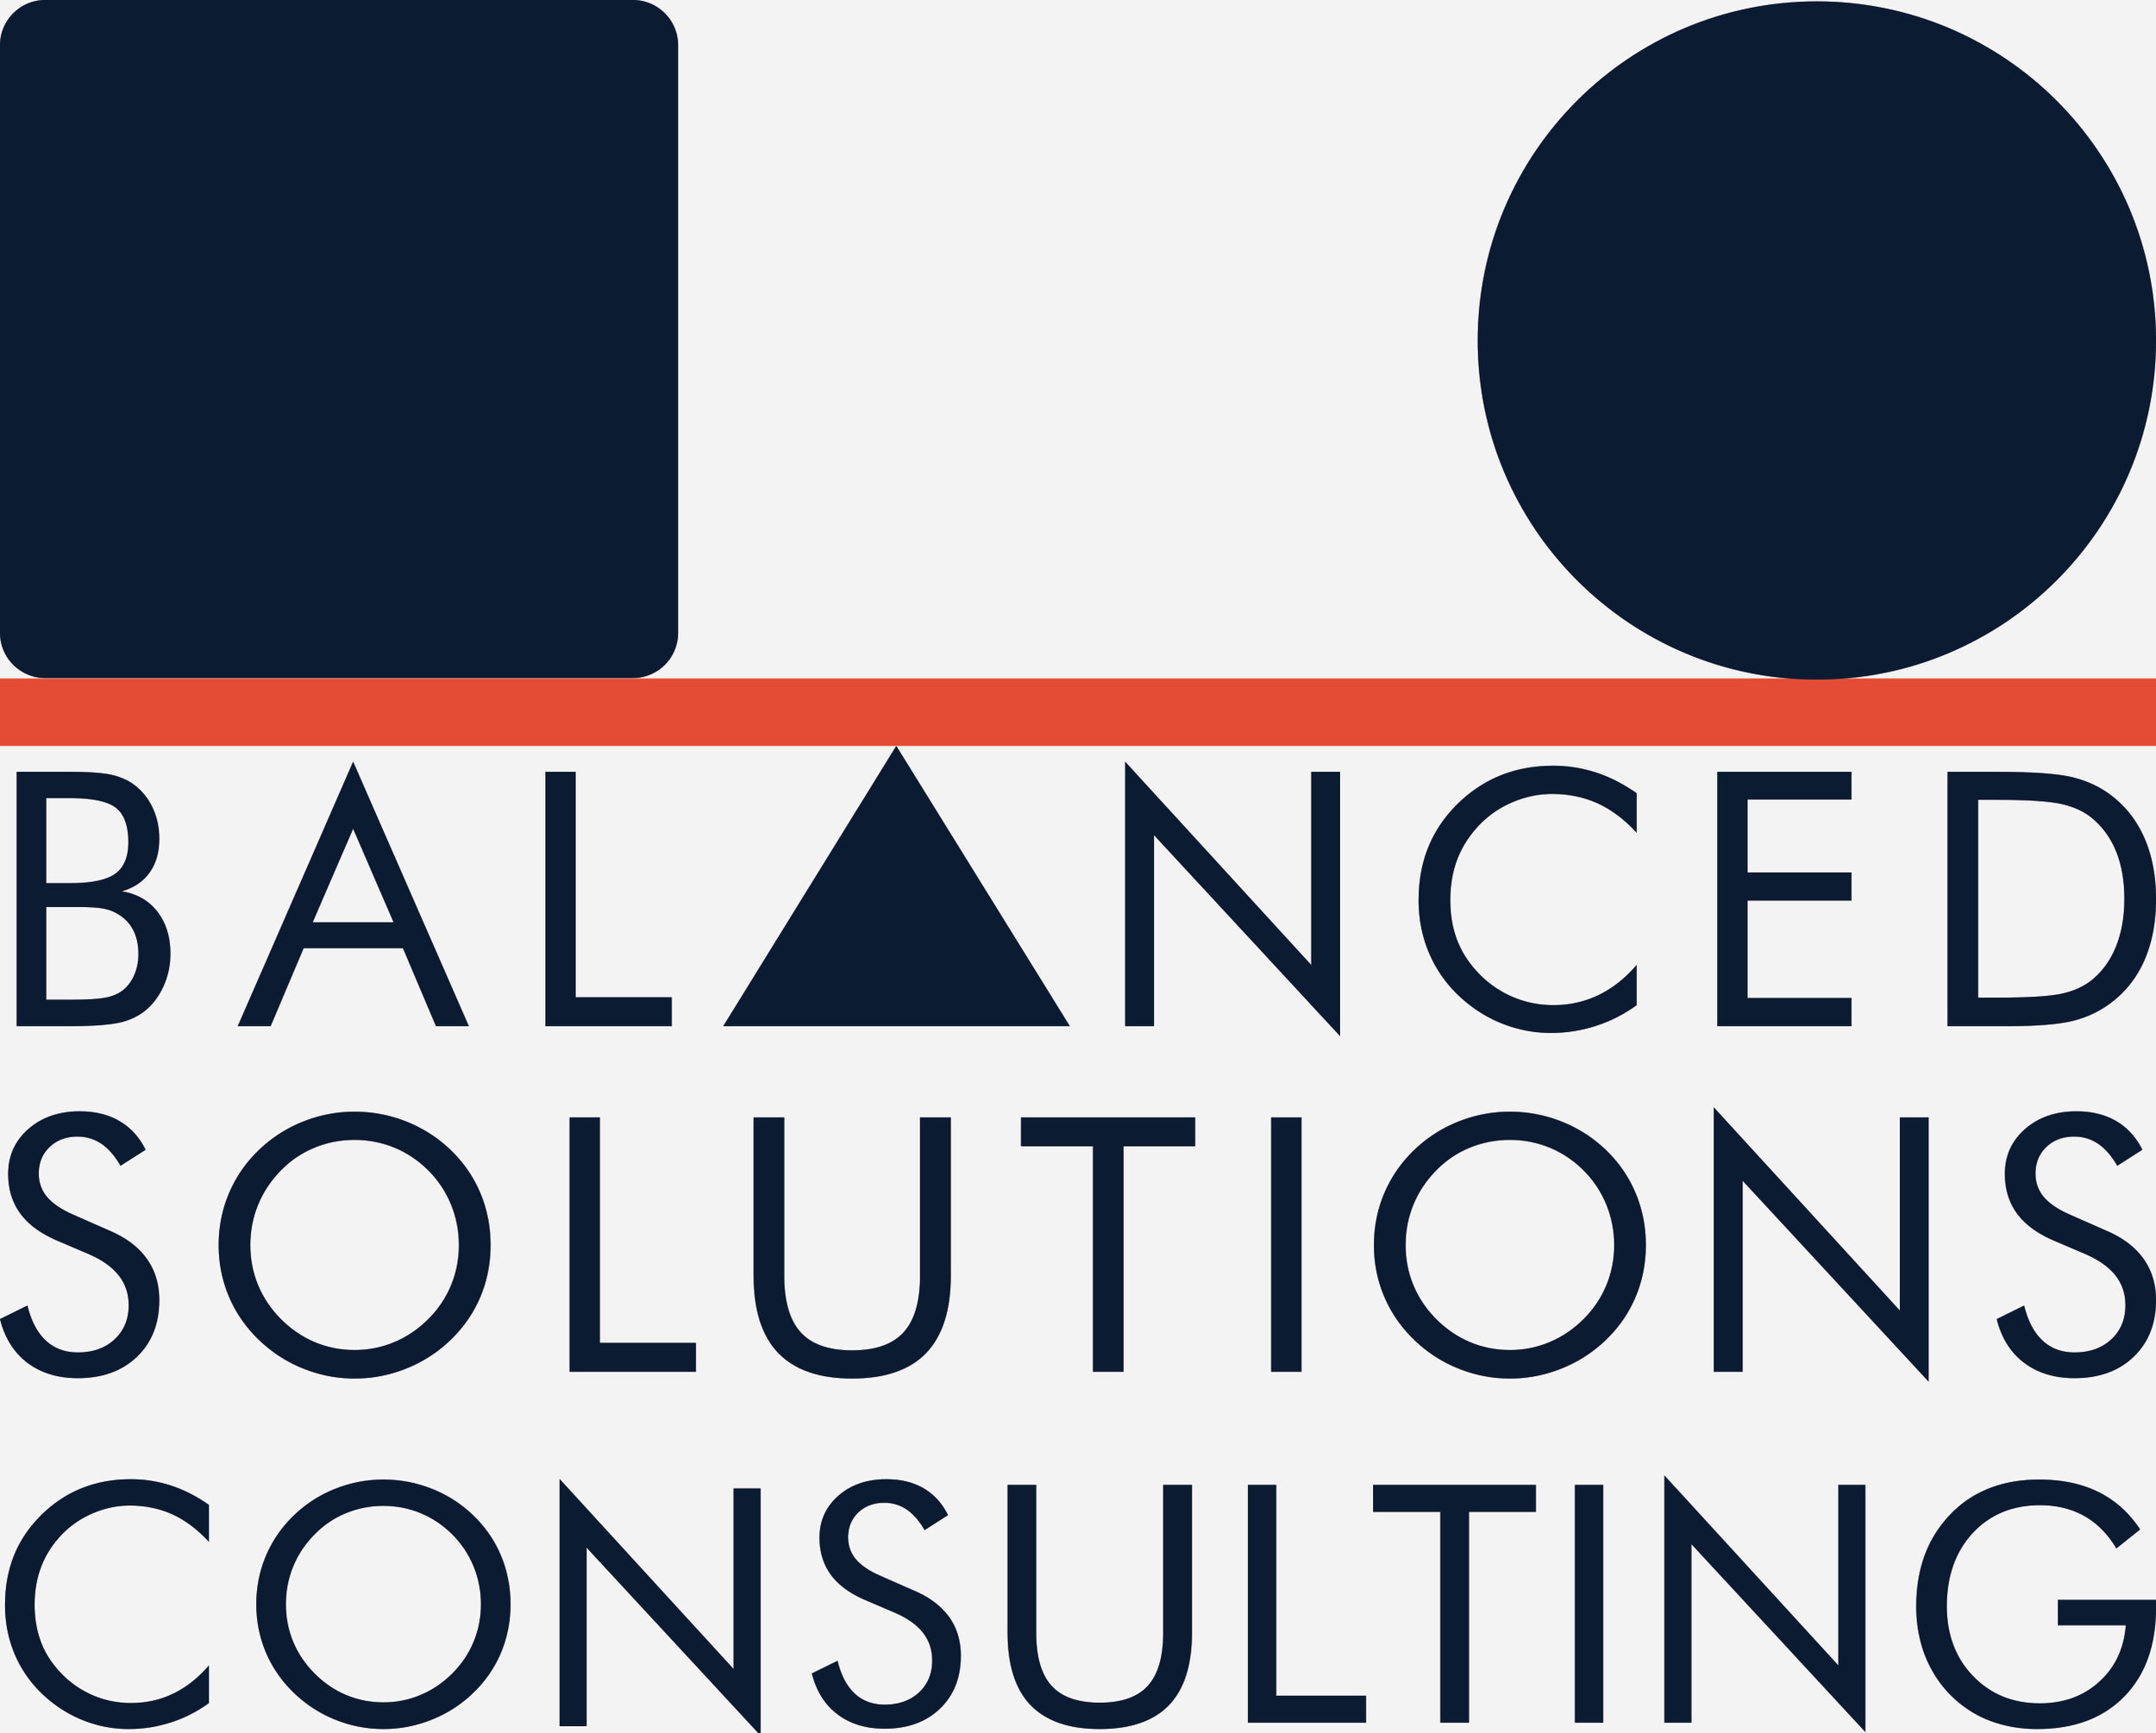 Balanced Solutions Consulting